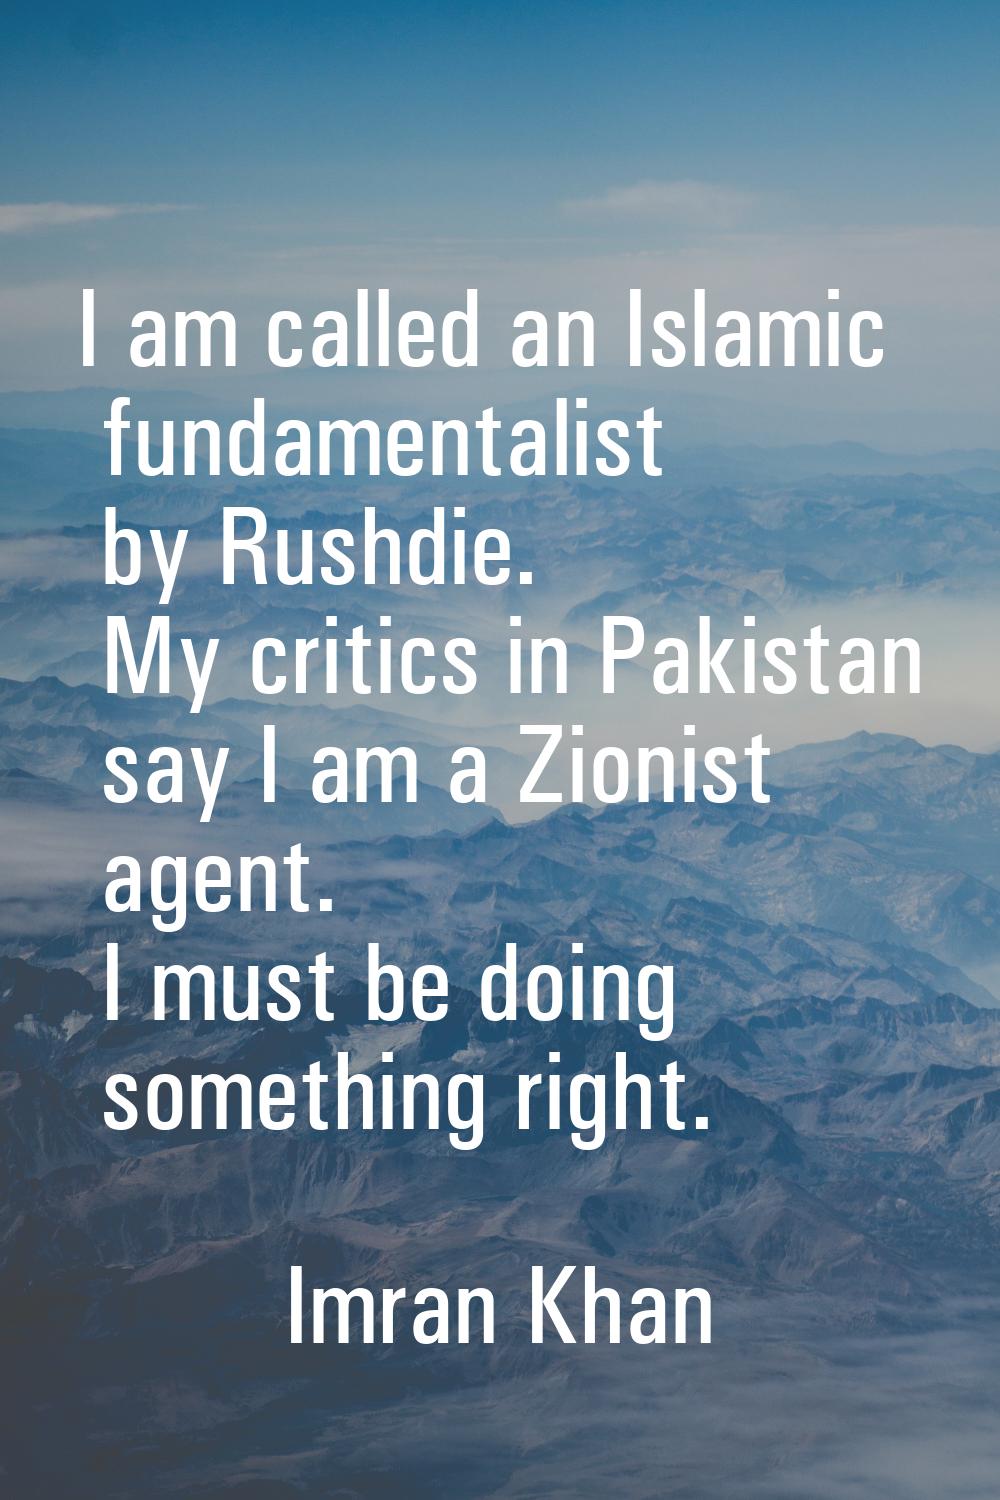 I am called an Islamic fundamentalist by Rushdie. My critics in Pakistan say I am a Zionist agent. 